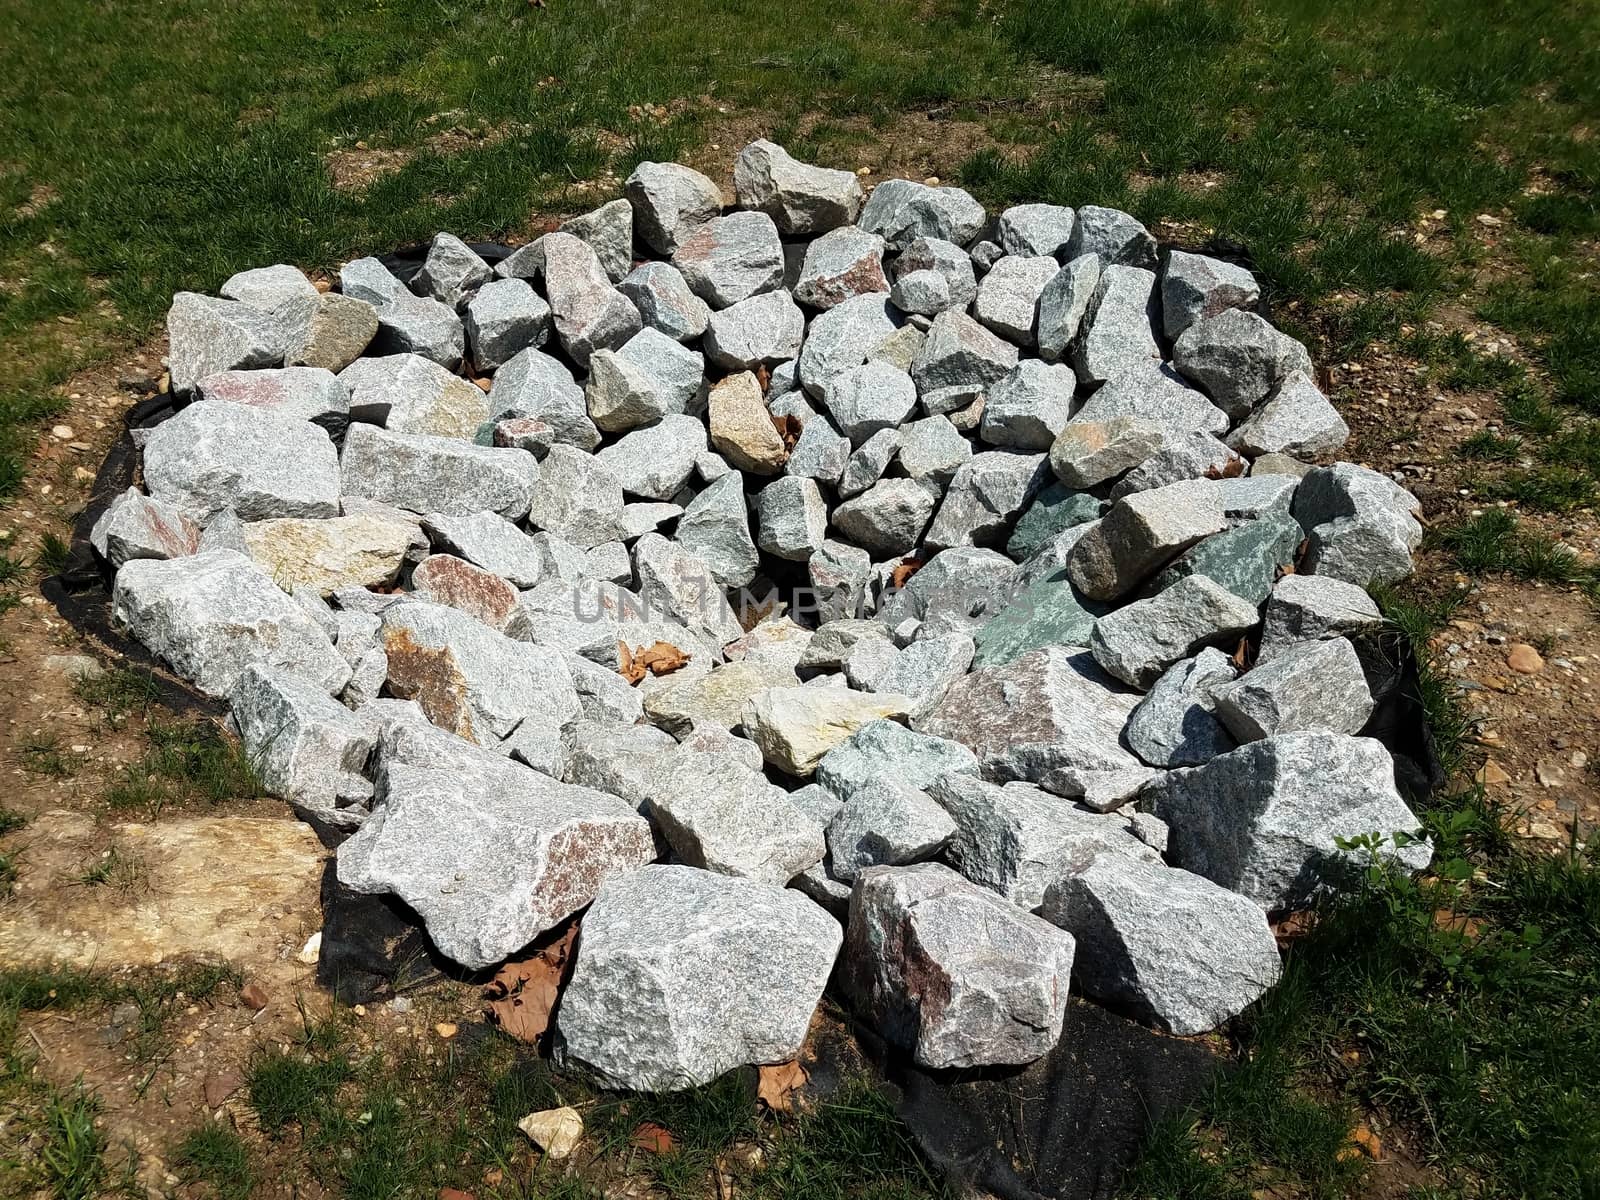 grey rocks or stones or boulders in circular formation on grass or lawn